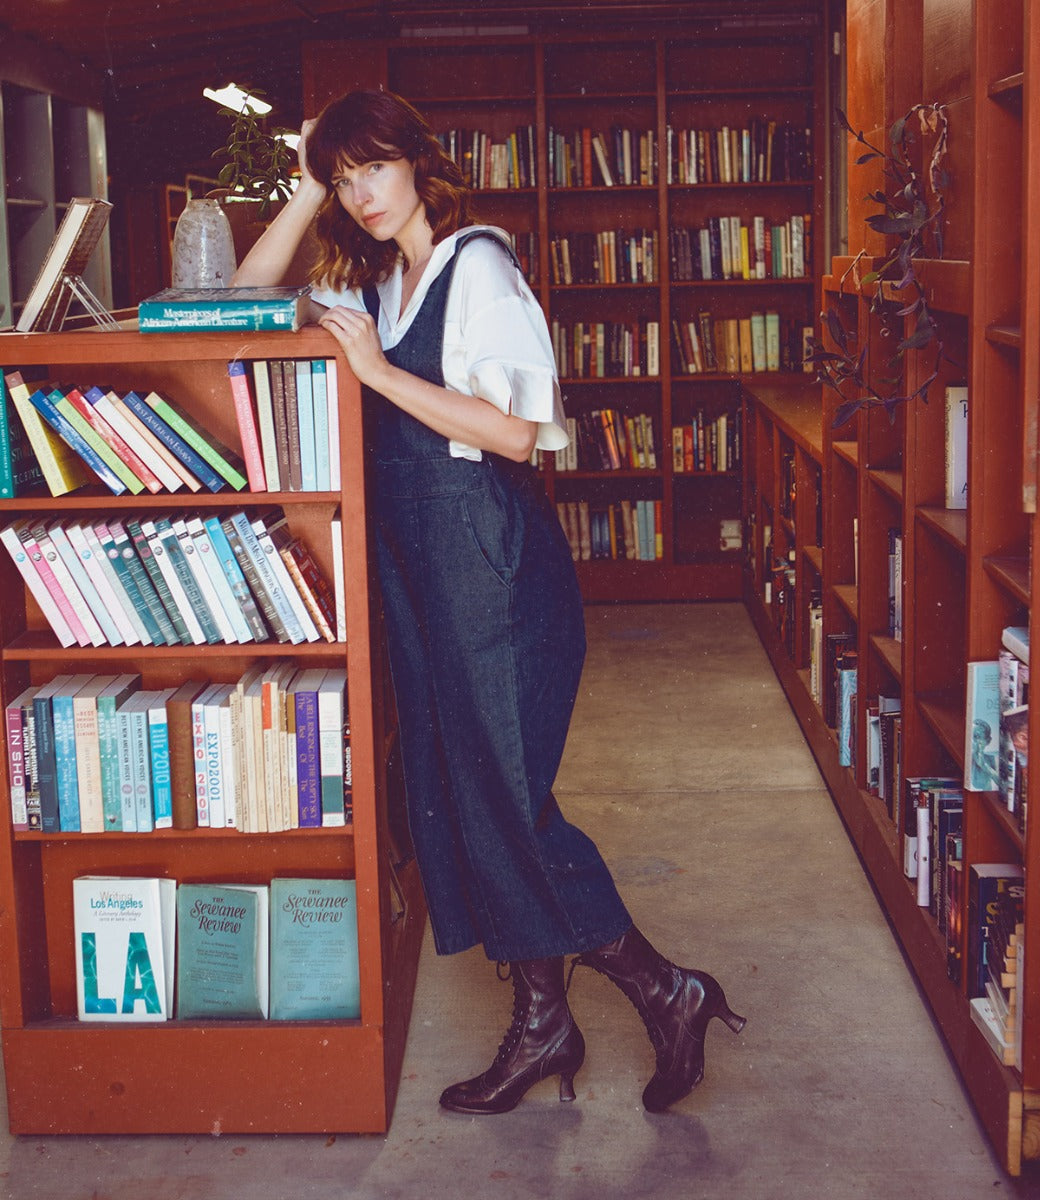 A woman with Oak Tree Farms Jasmine leather boots leaning against a bookcase in a library.